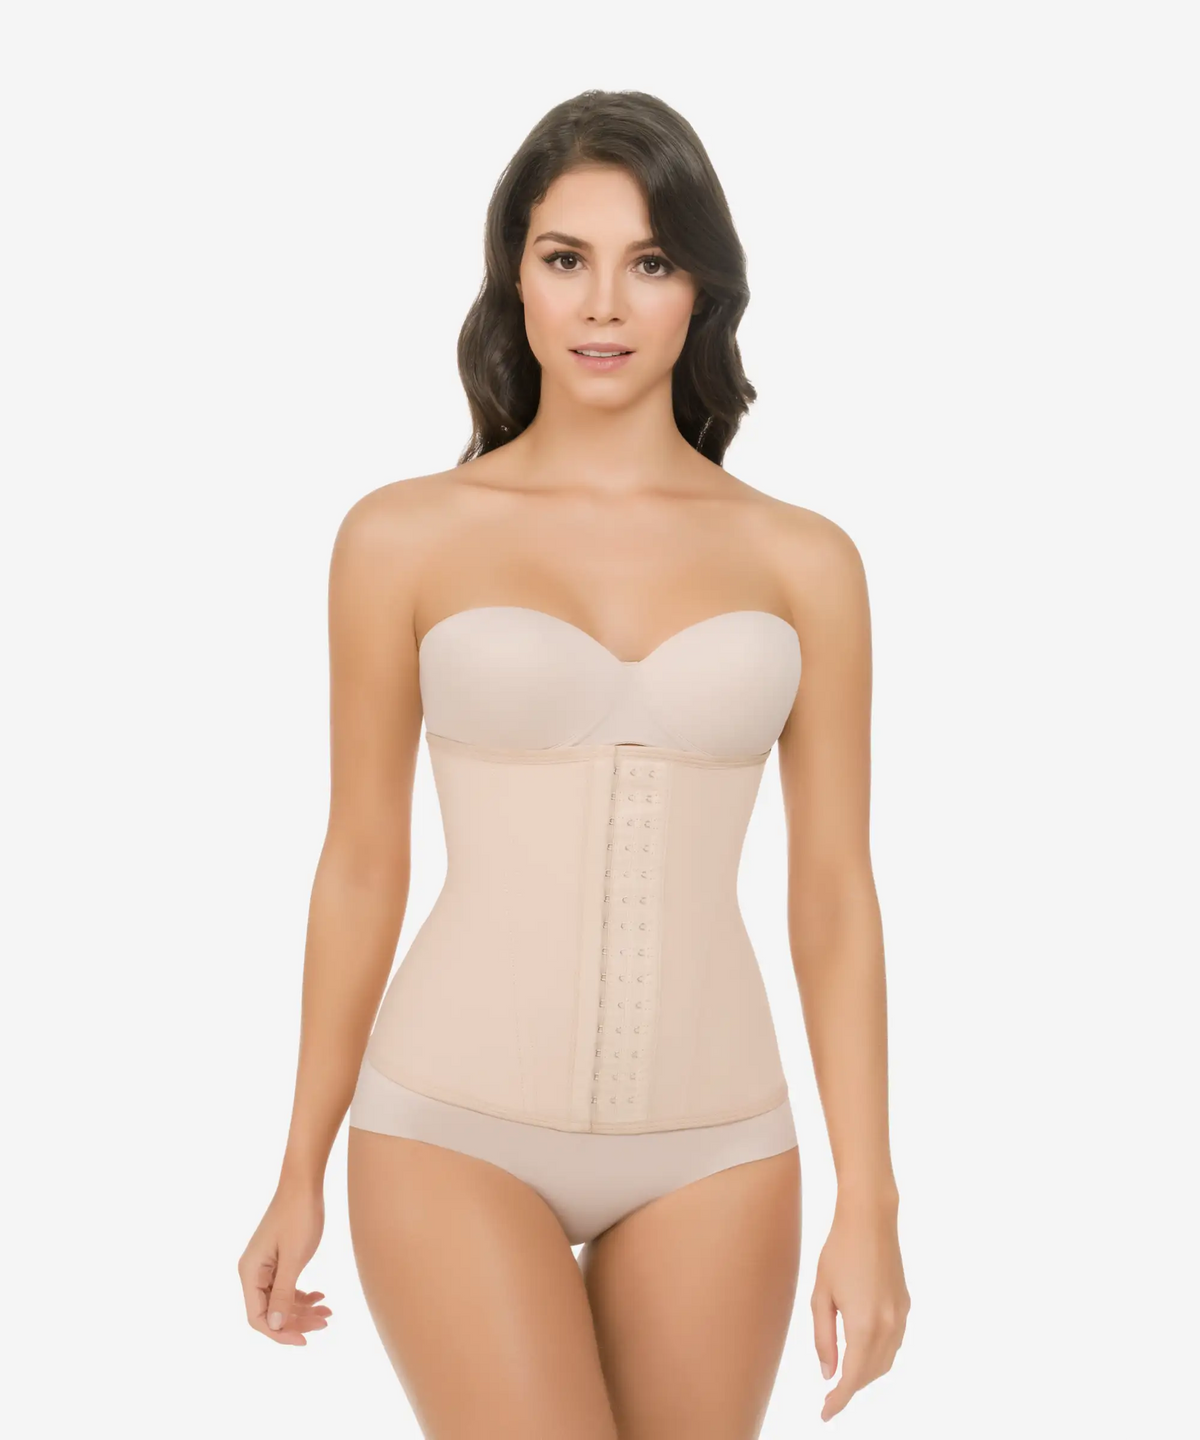 Cysm Seamless Thermal Action Weight Loss Hourglass Bodysuit